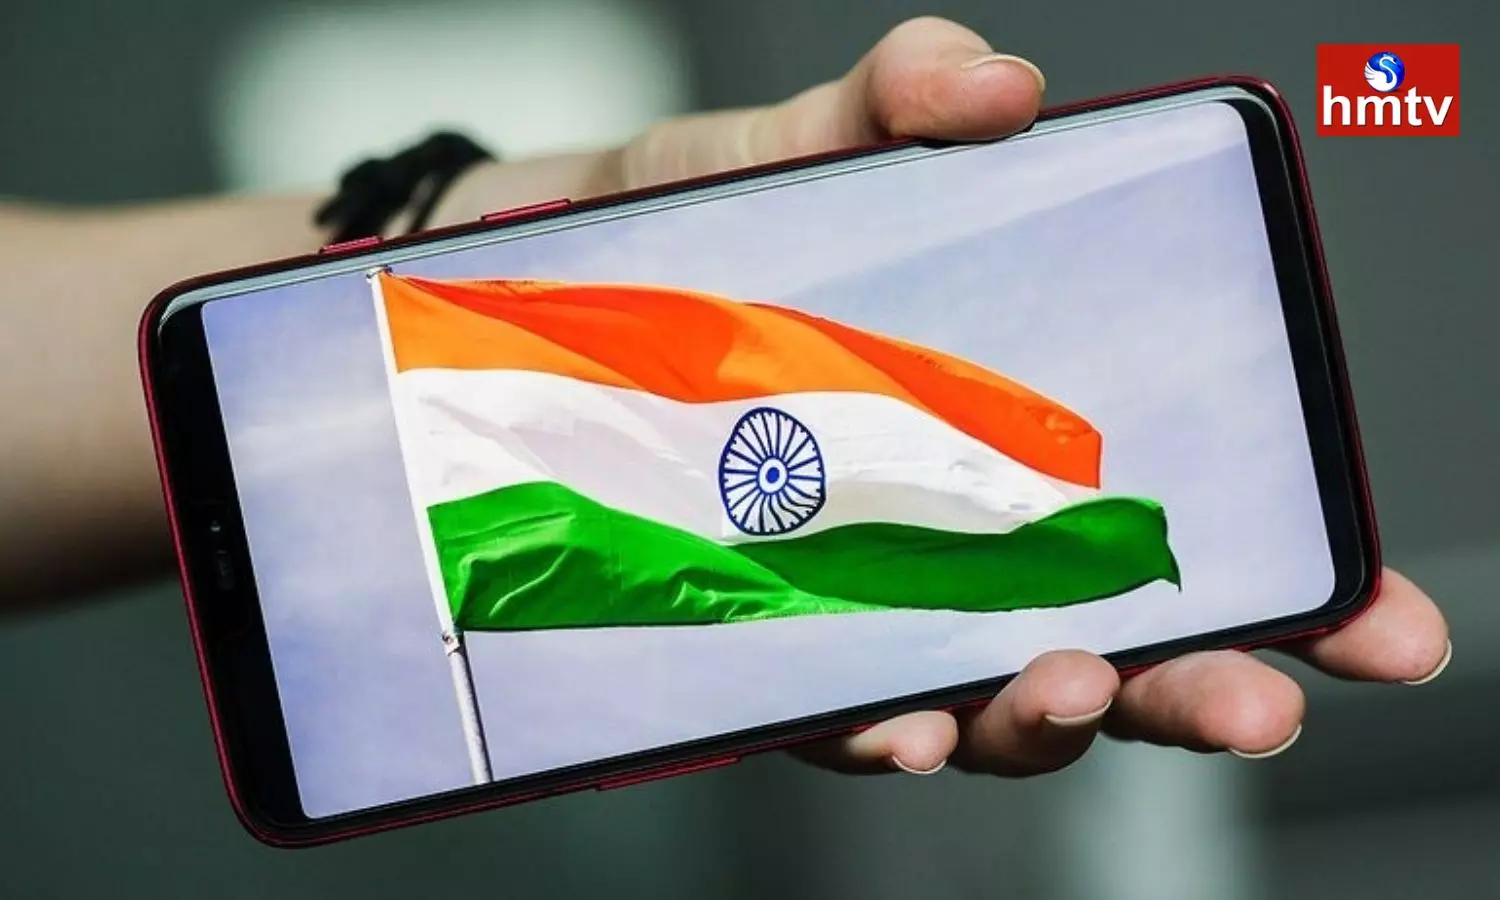 Apple Contribution to Made in India Smartphone Shipments Reached 25%